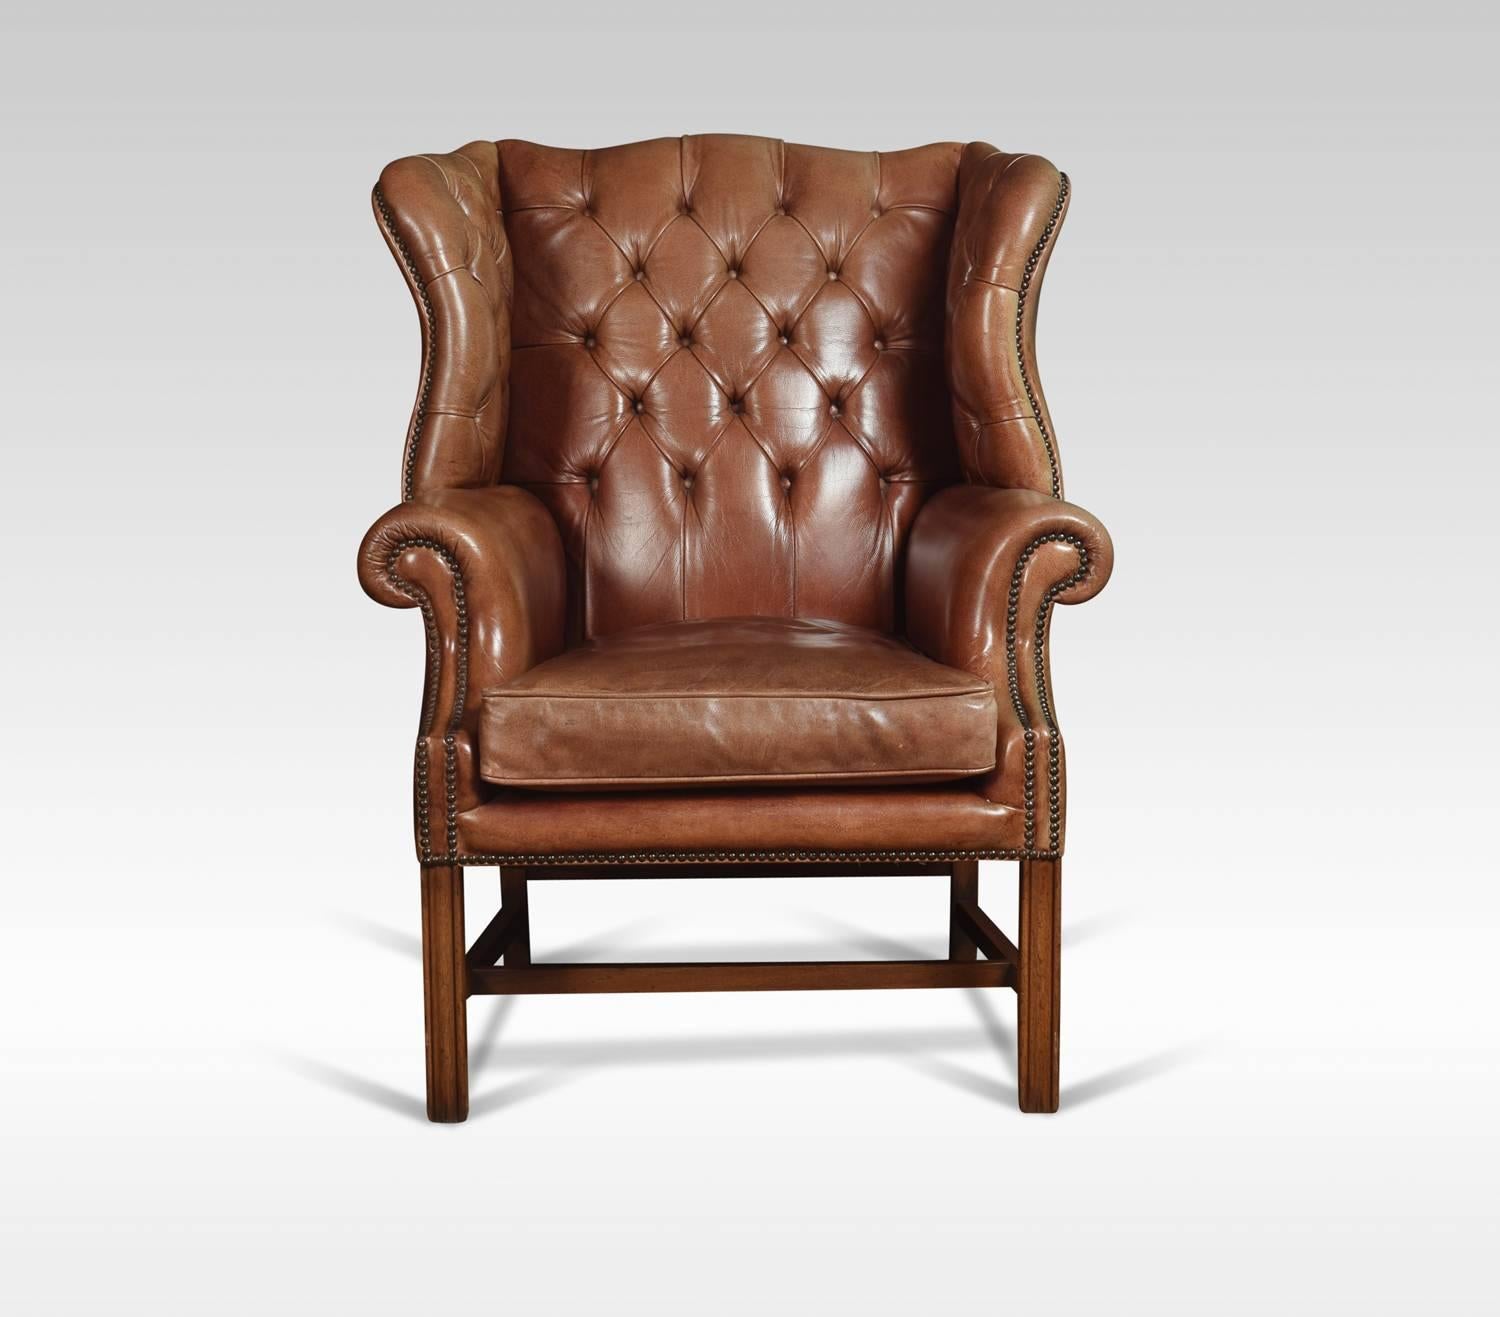 Mahogany framed wing armchair of generous proportions, the arched top above deep buttoned back, upholstered arms and seat in a sun bleached burgundy leather, raised up on square supports united by stretcher
Dimensions:
Height 44.5 inches, height